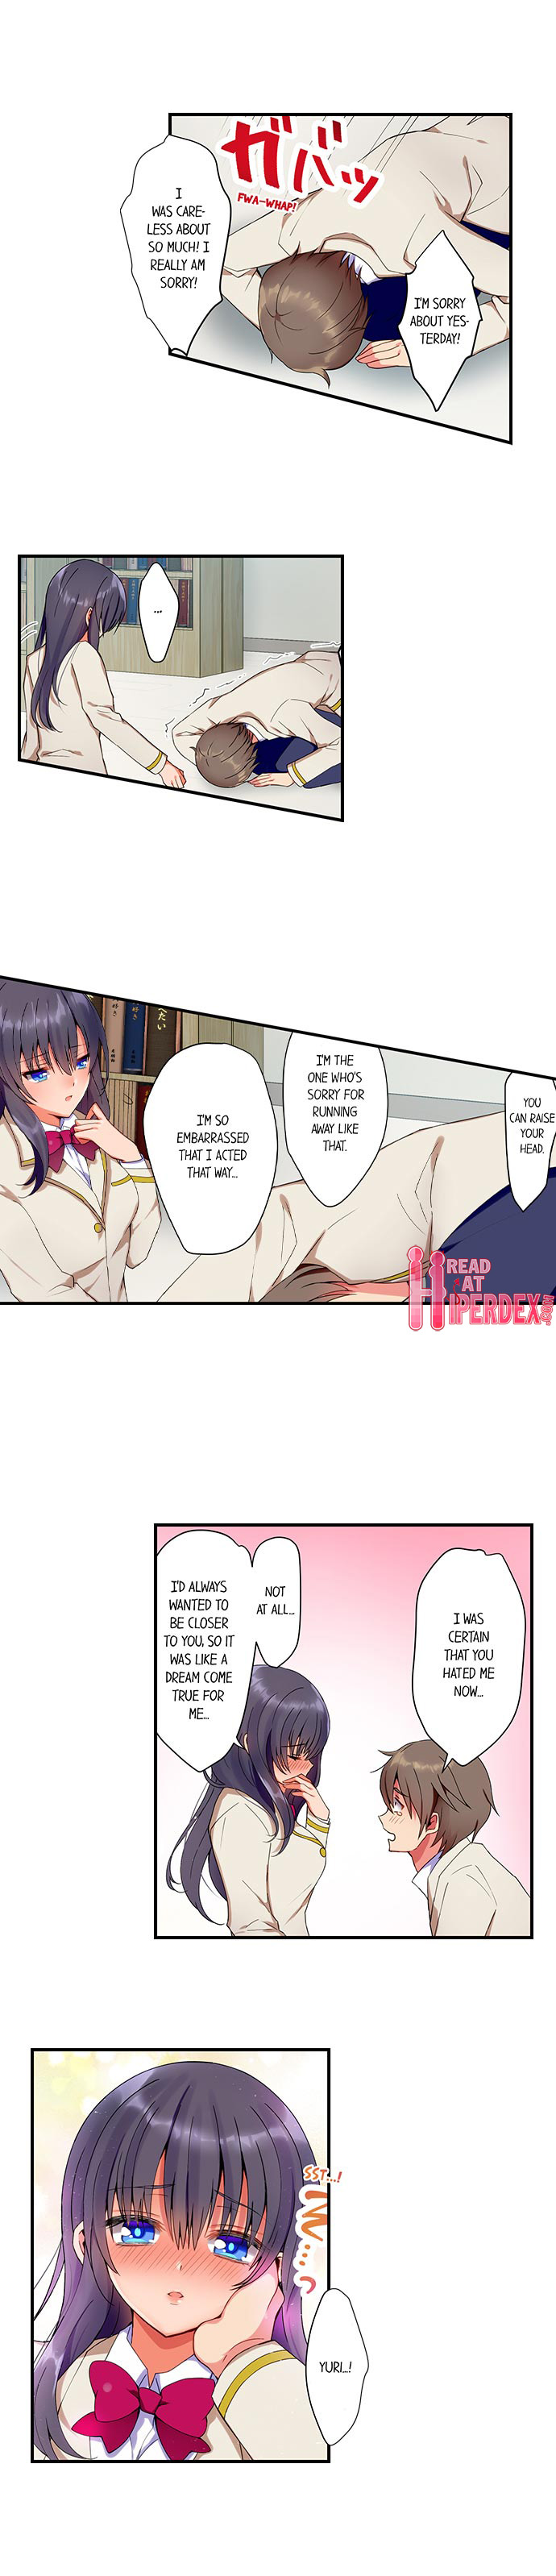 Cool Miss Yuri is a Squirter - Chapter 8 Page 5